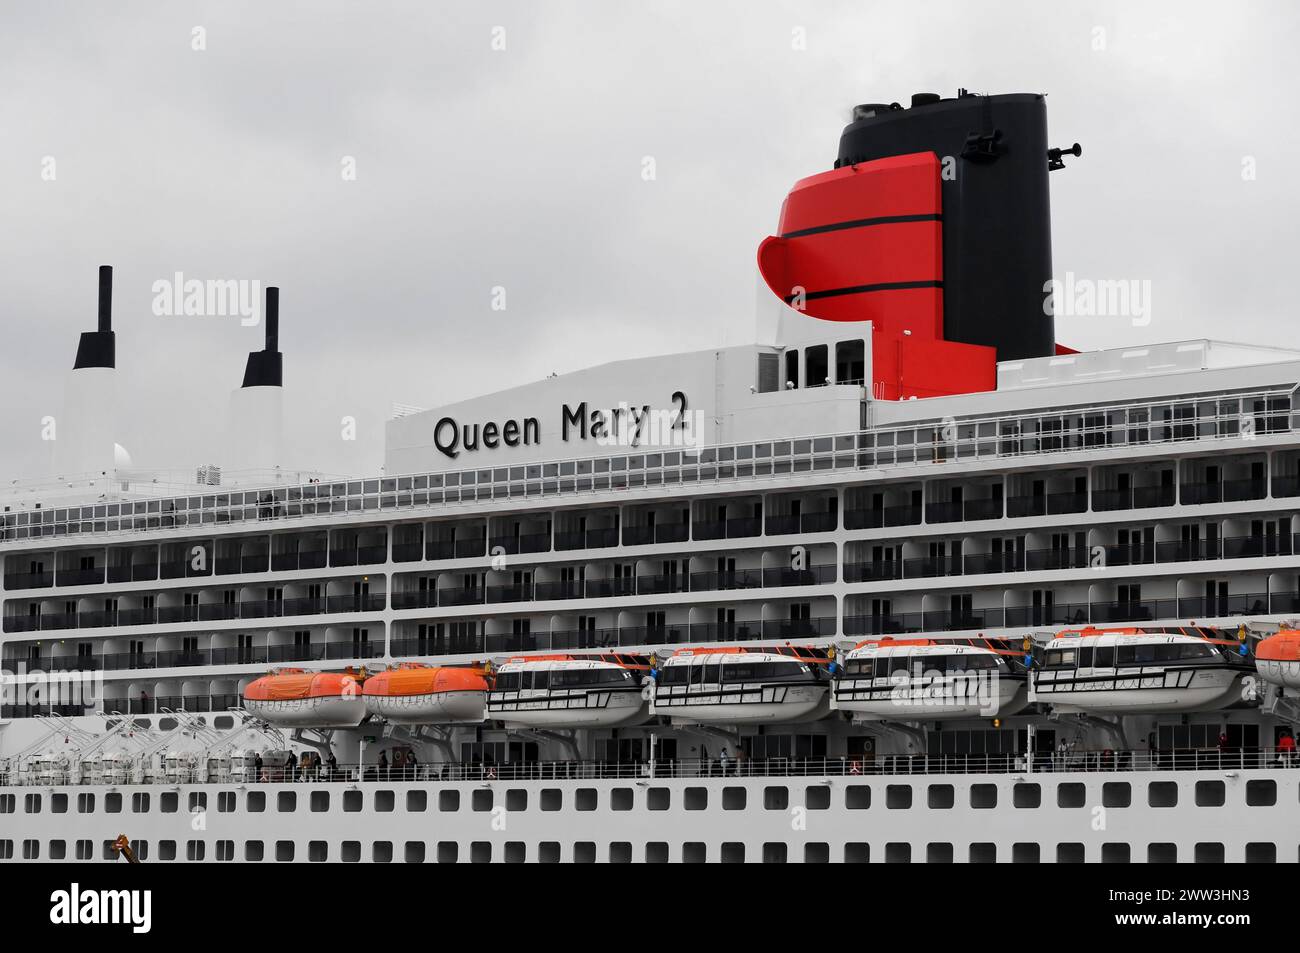 Side view of the Queen Mary 2 with funnel and lifeboats, Hamburg, Hanseatic City of Hamburg, Germany Stock Photo